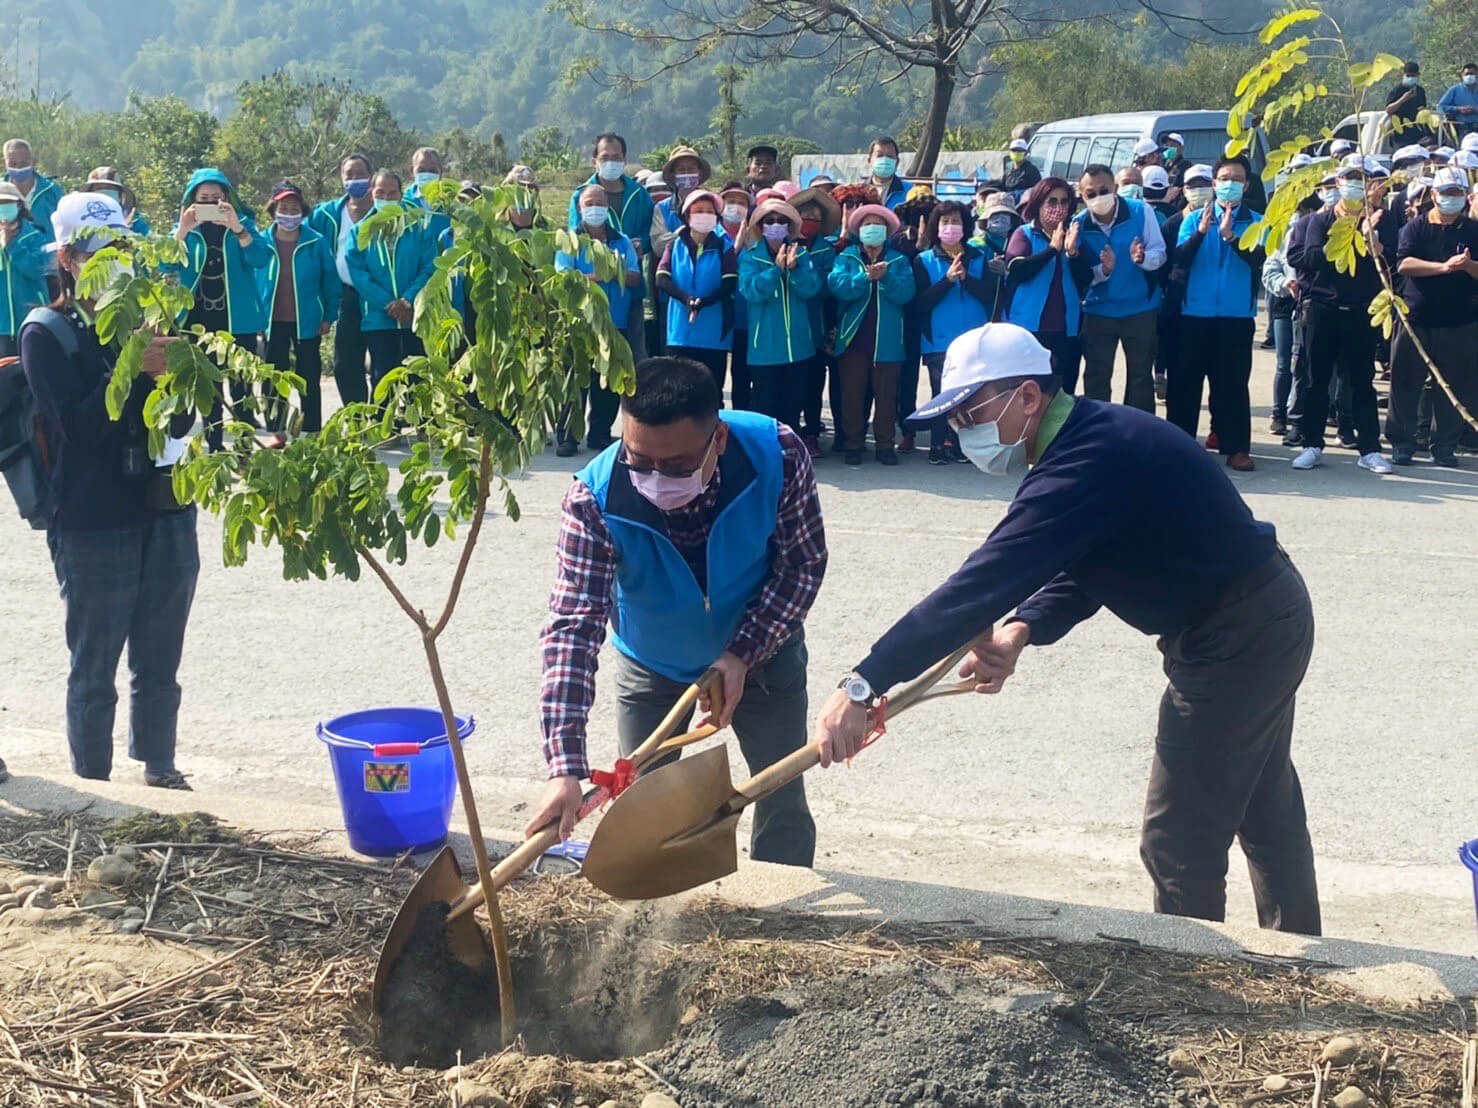 RONAL employees in Taiwan planting trees